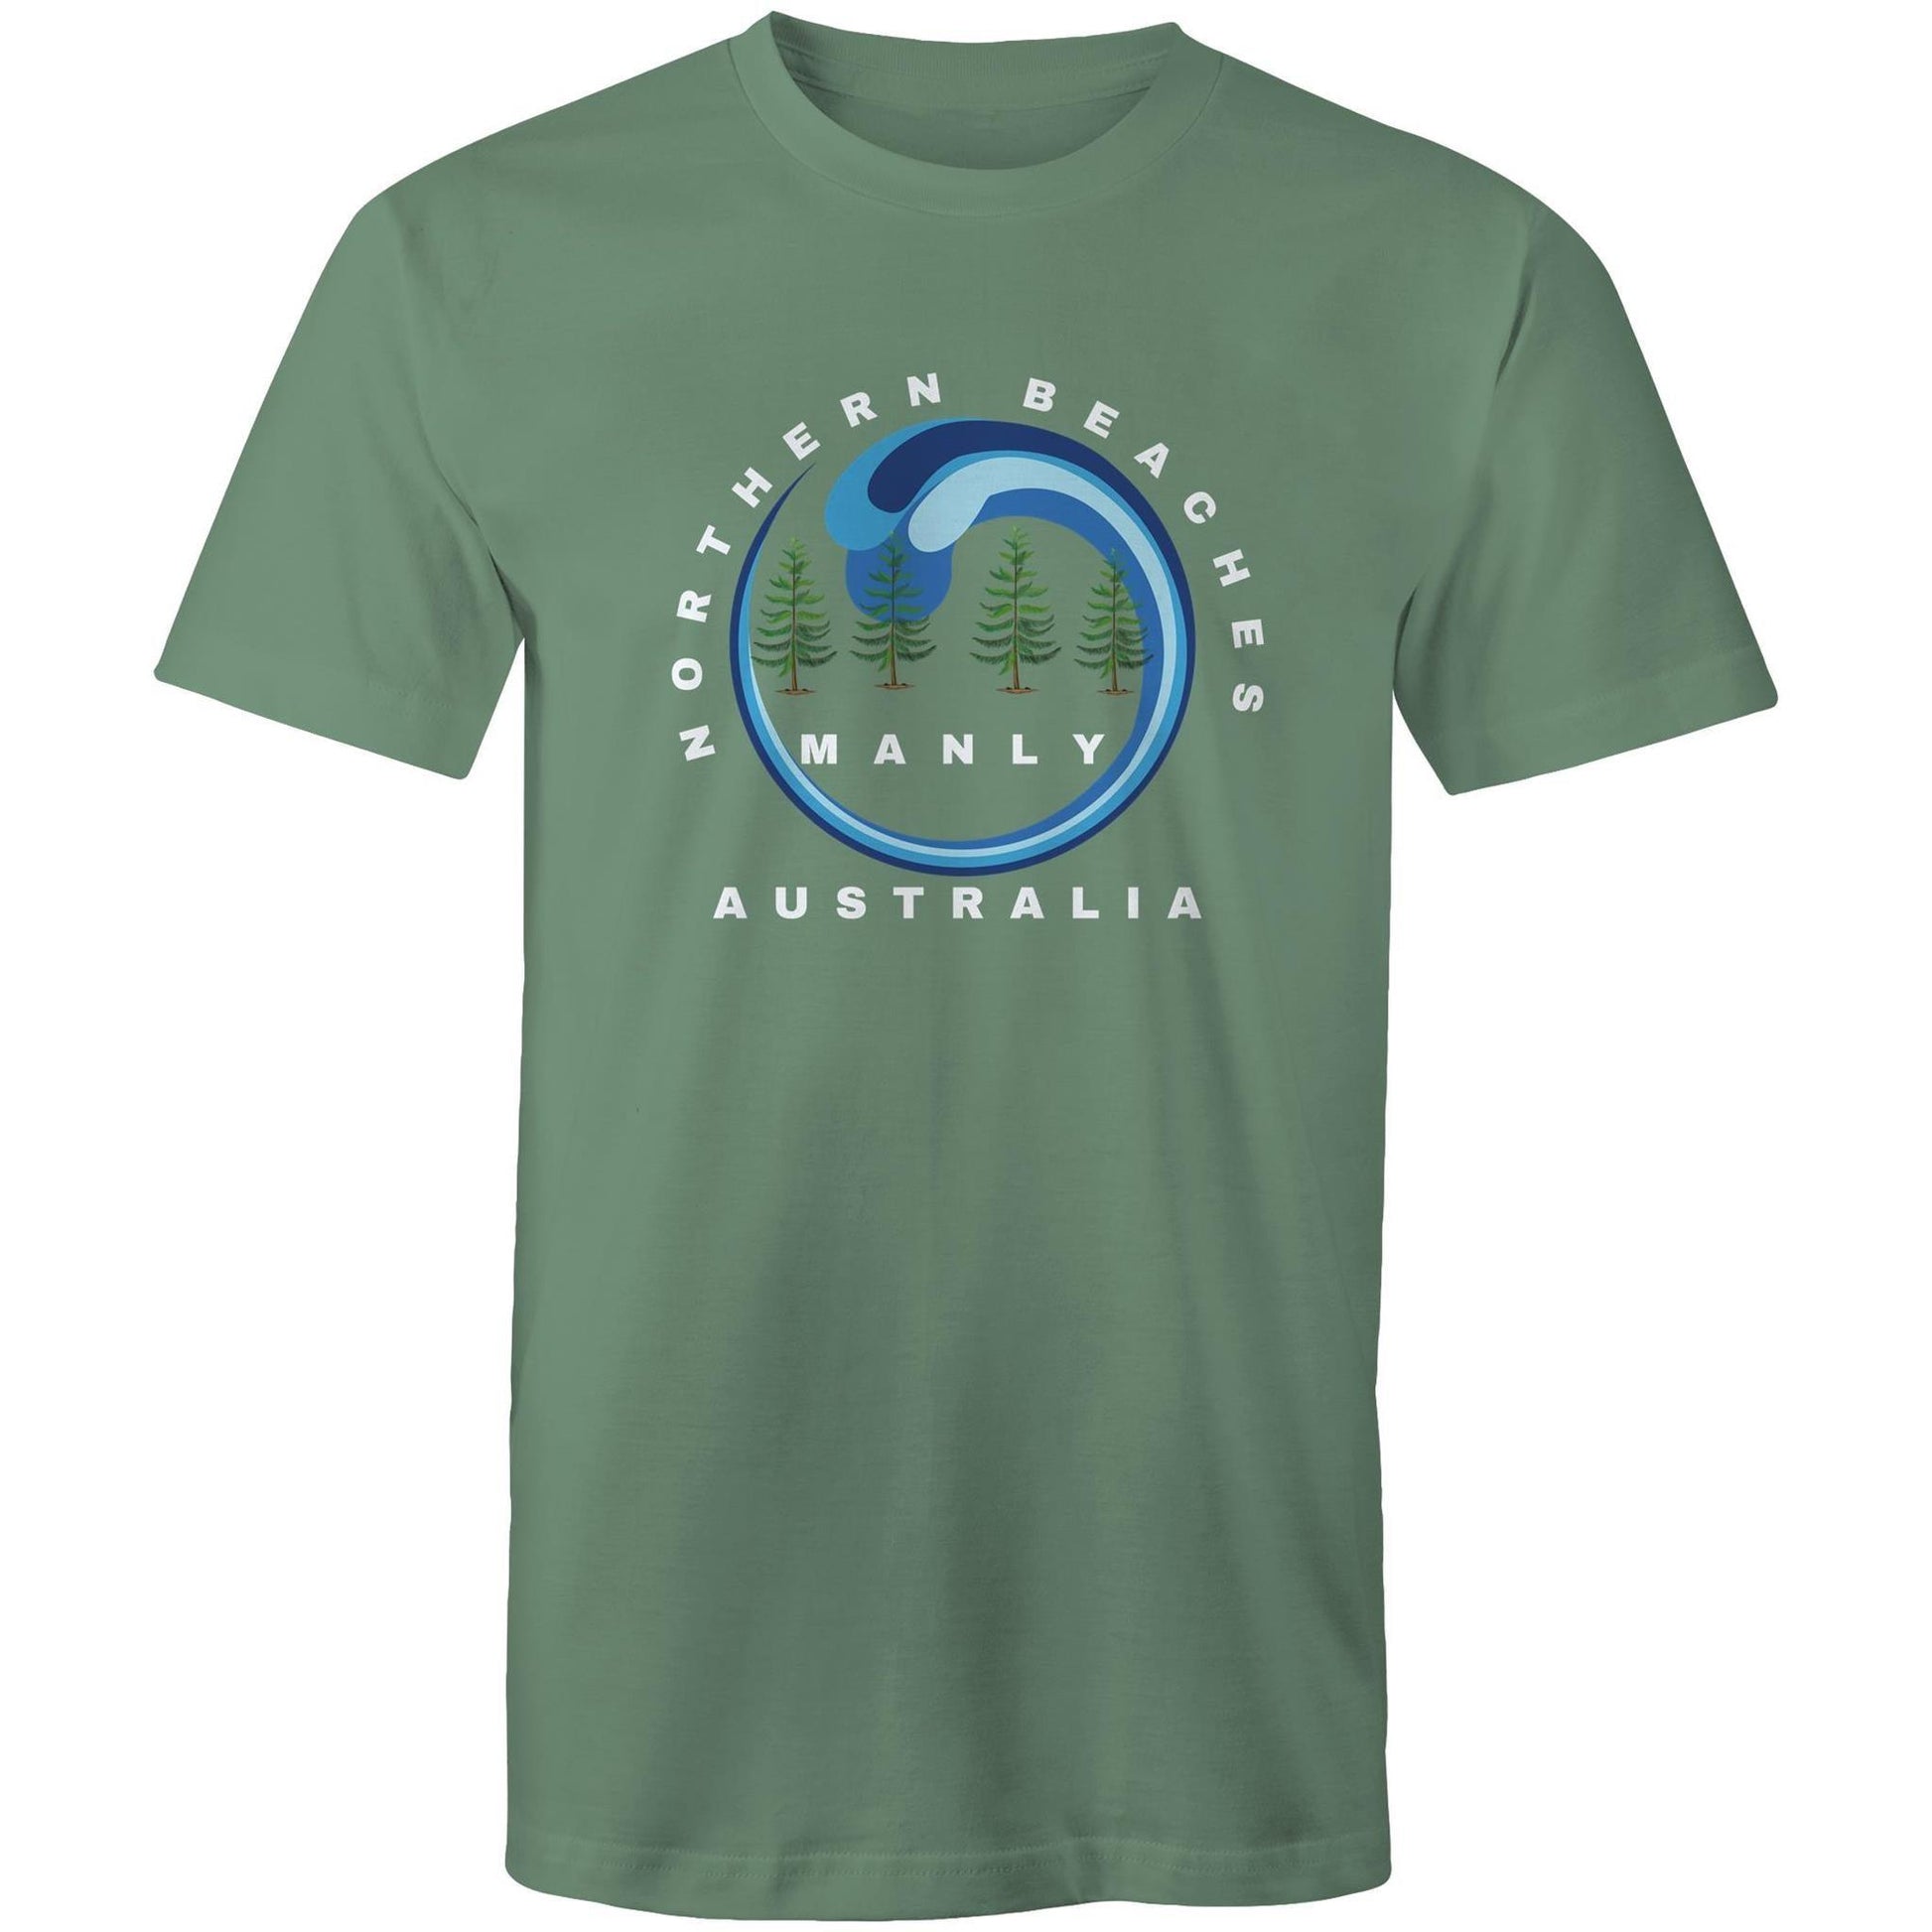 Mens soft cotton T-Shirt Northern Beaches logo in sizes up to 5XL - Lost Manly Shop